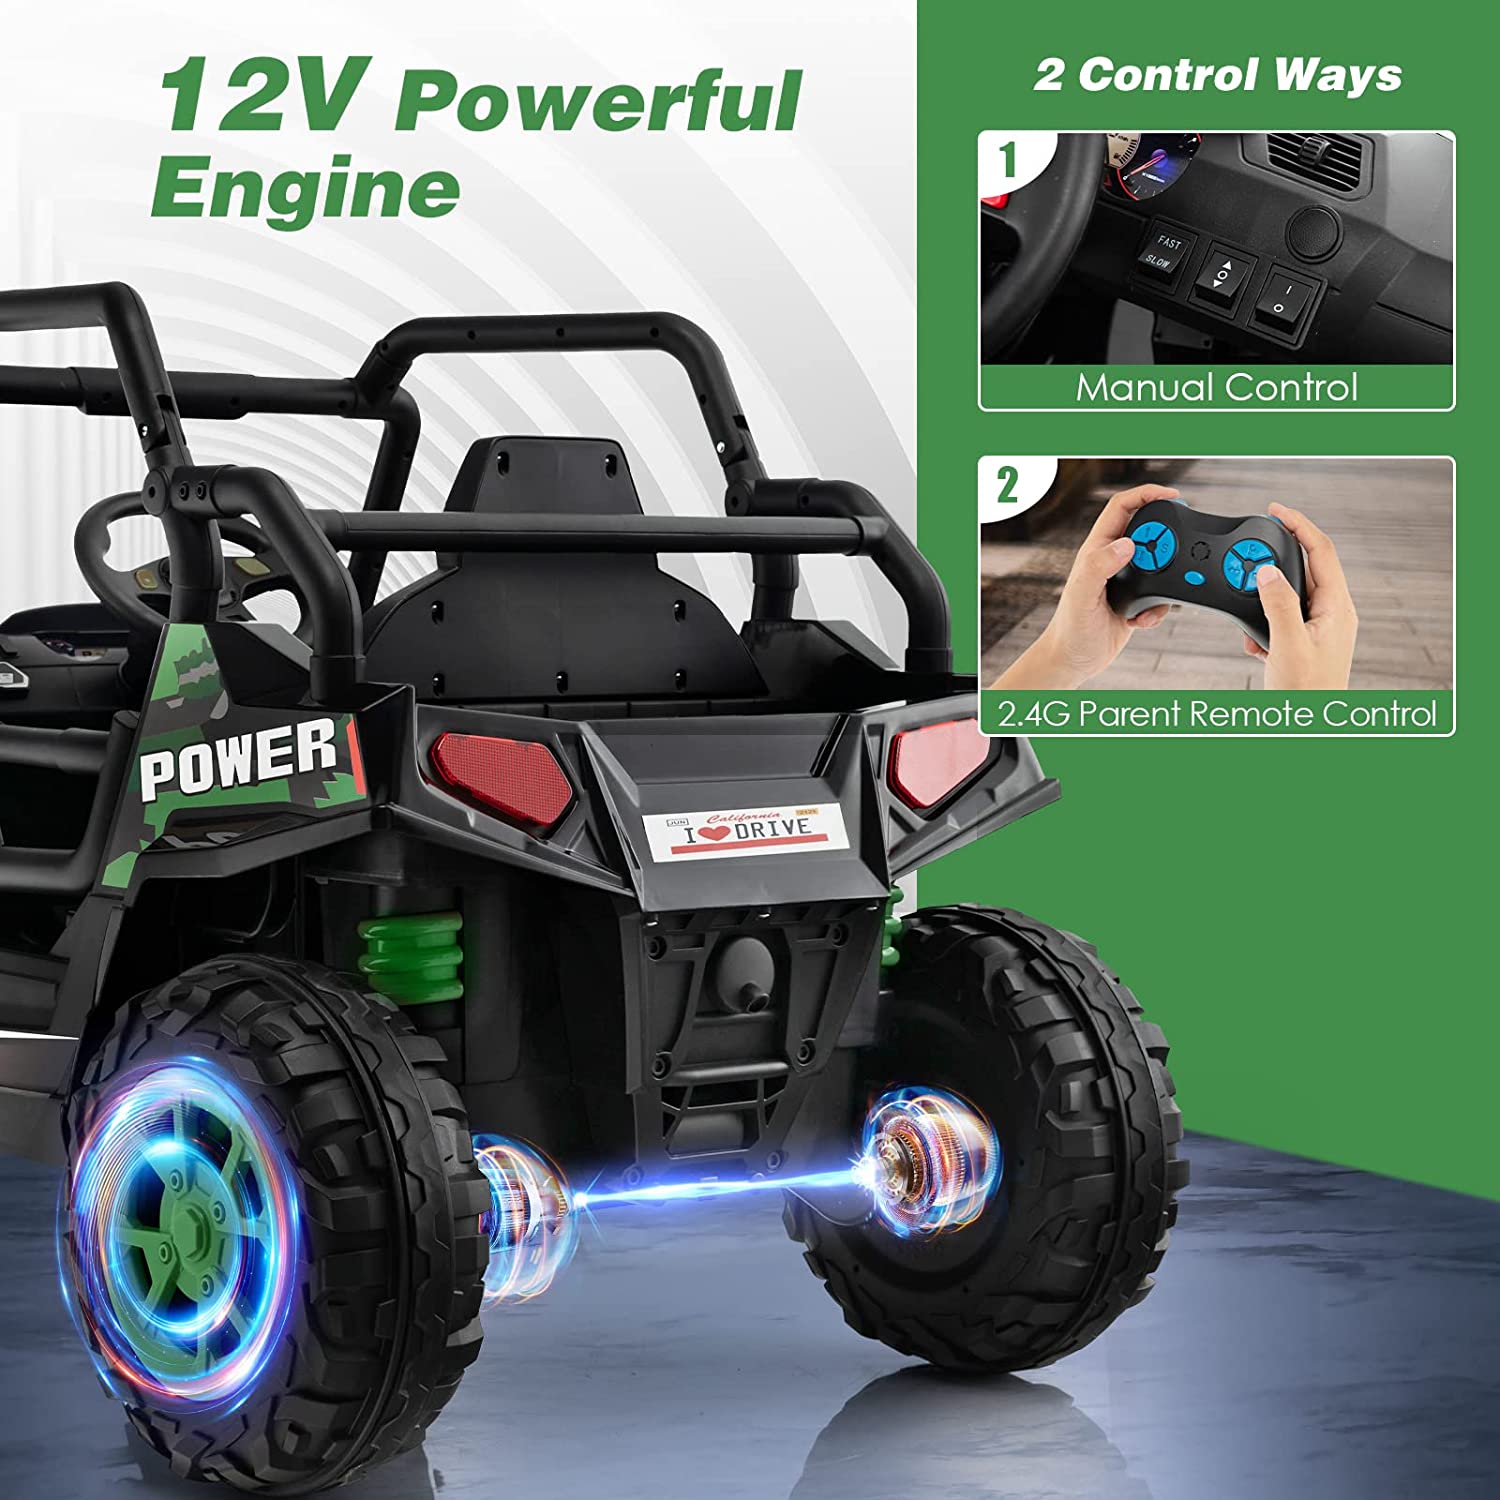 Chairliving 12V Kids Ride On UTV Car Battery Powered Off-Road Buggy Truck with Remote Control USB Port for Boys Girls 